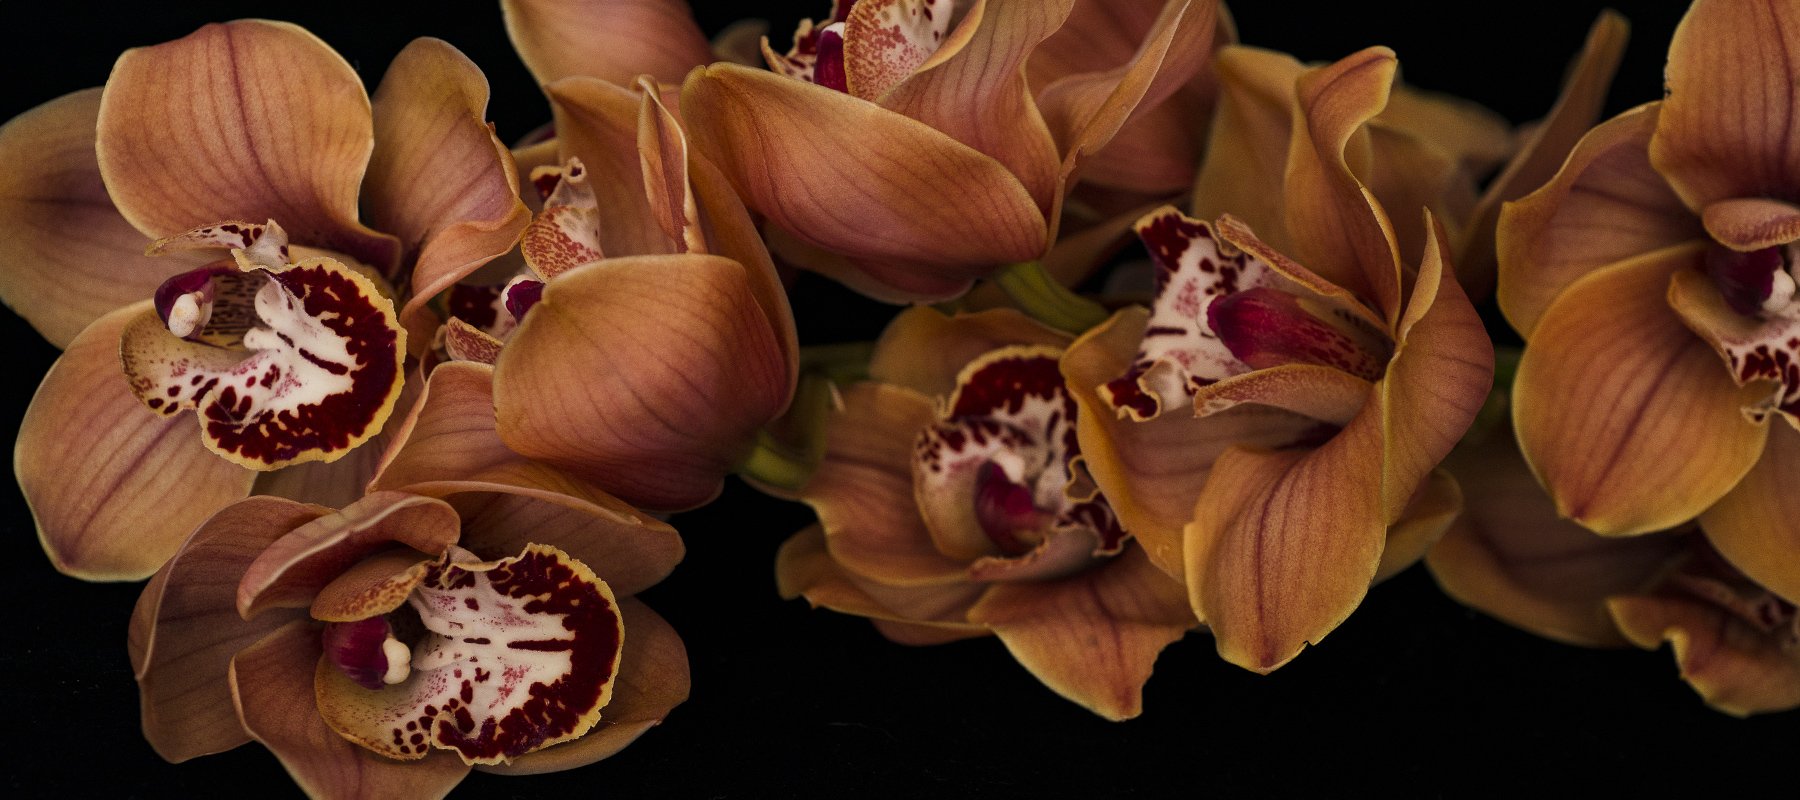 #The Renaissance Series Cymbidium Orchid by Helen Bankers